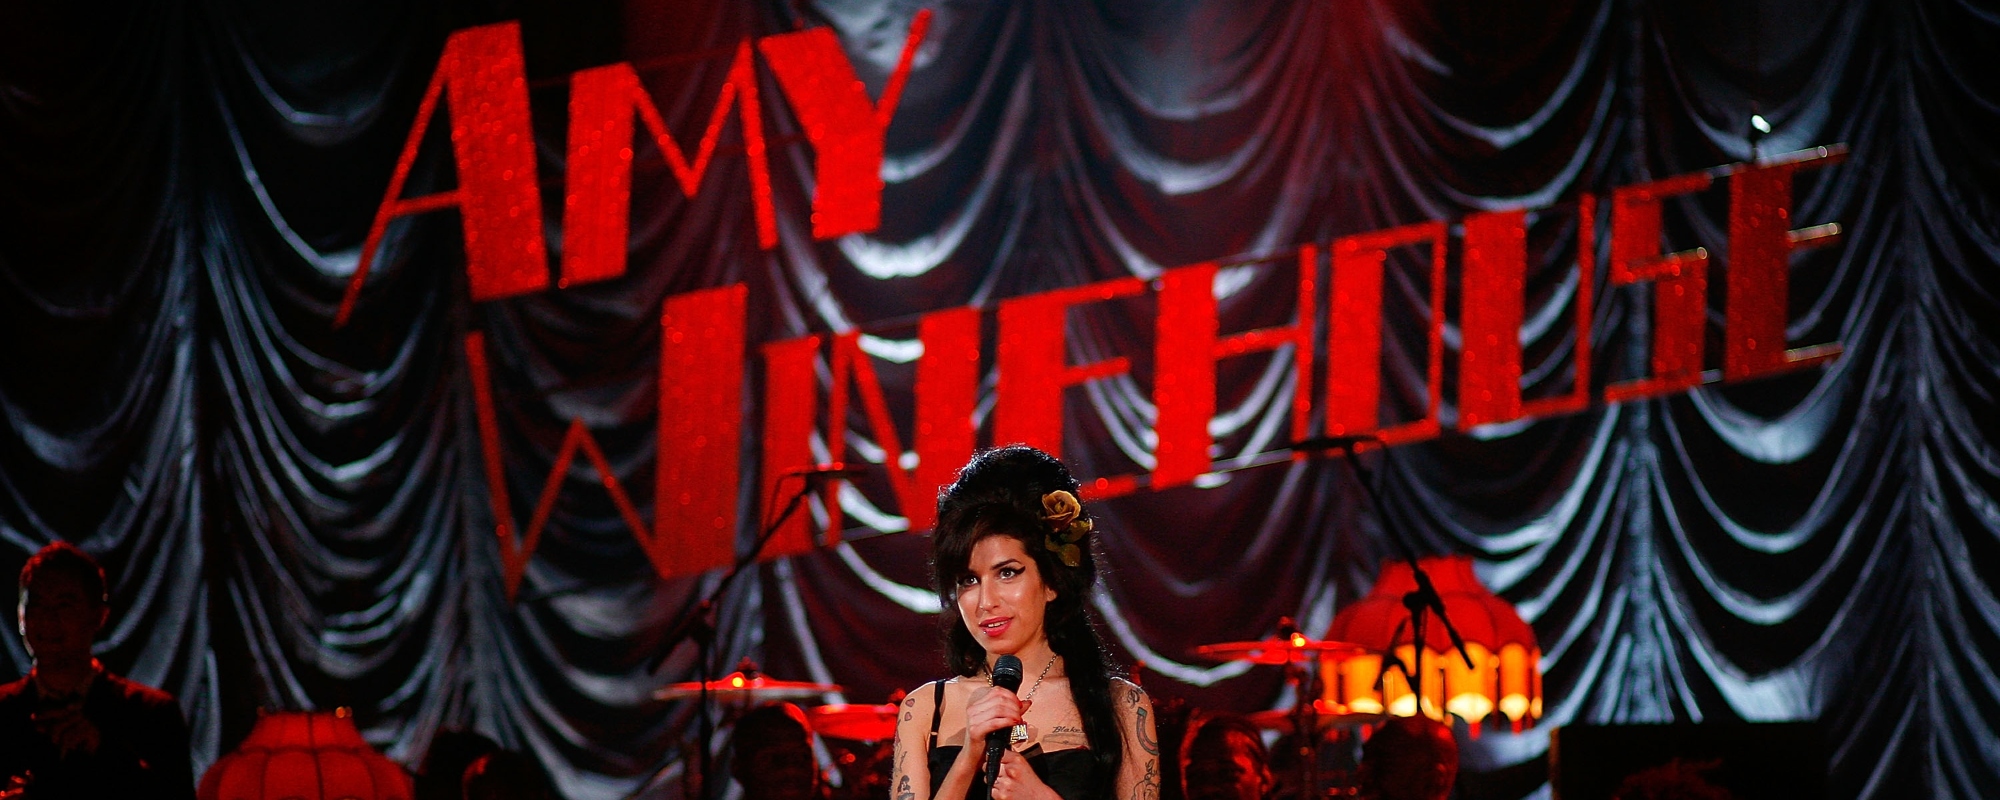 Soundtrack Announced for Amy Winehouse Biopic ‘Back to Black,’ Including The Libertines, Nick Cave, and More